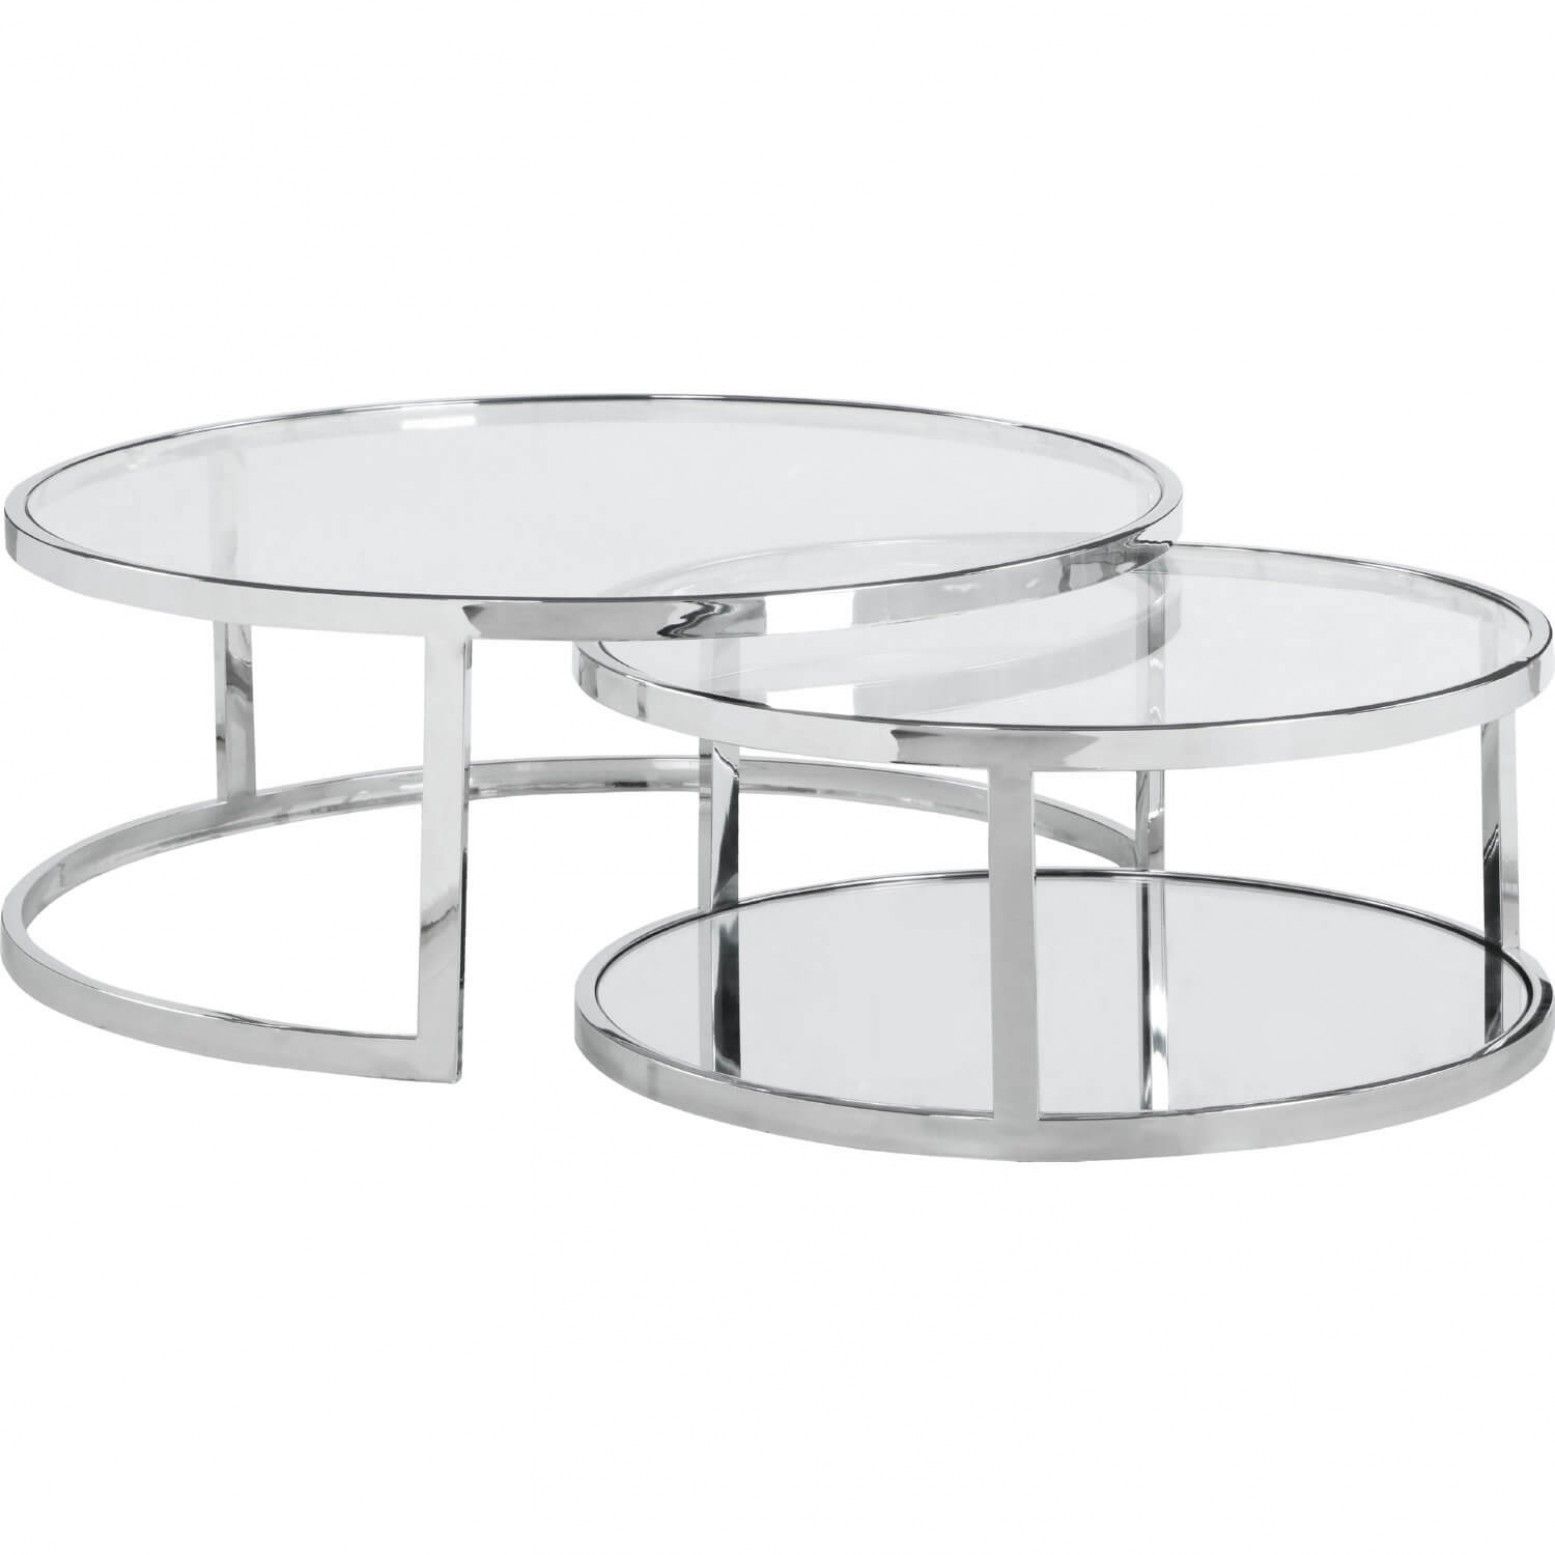 5509 35 Round Nesting Cocktail Table, Clear/polished With Polished Chrome Round Cocktail Tables (View 9 of 15)